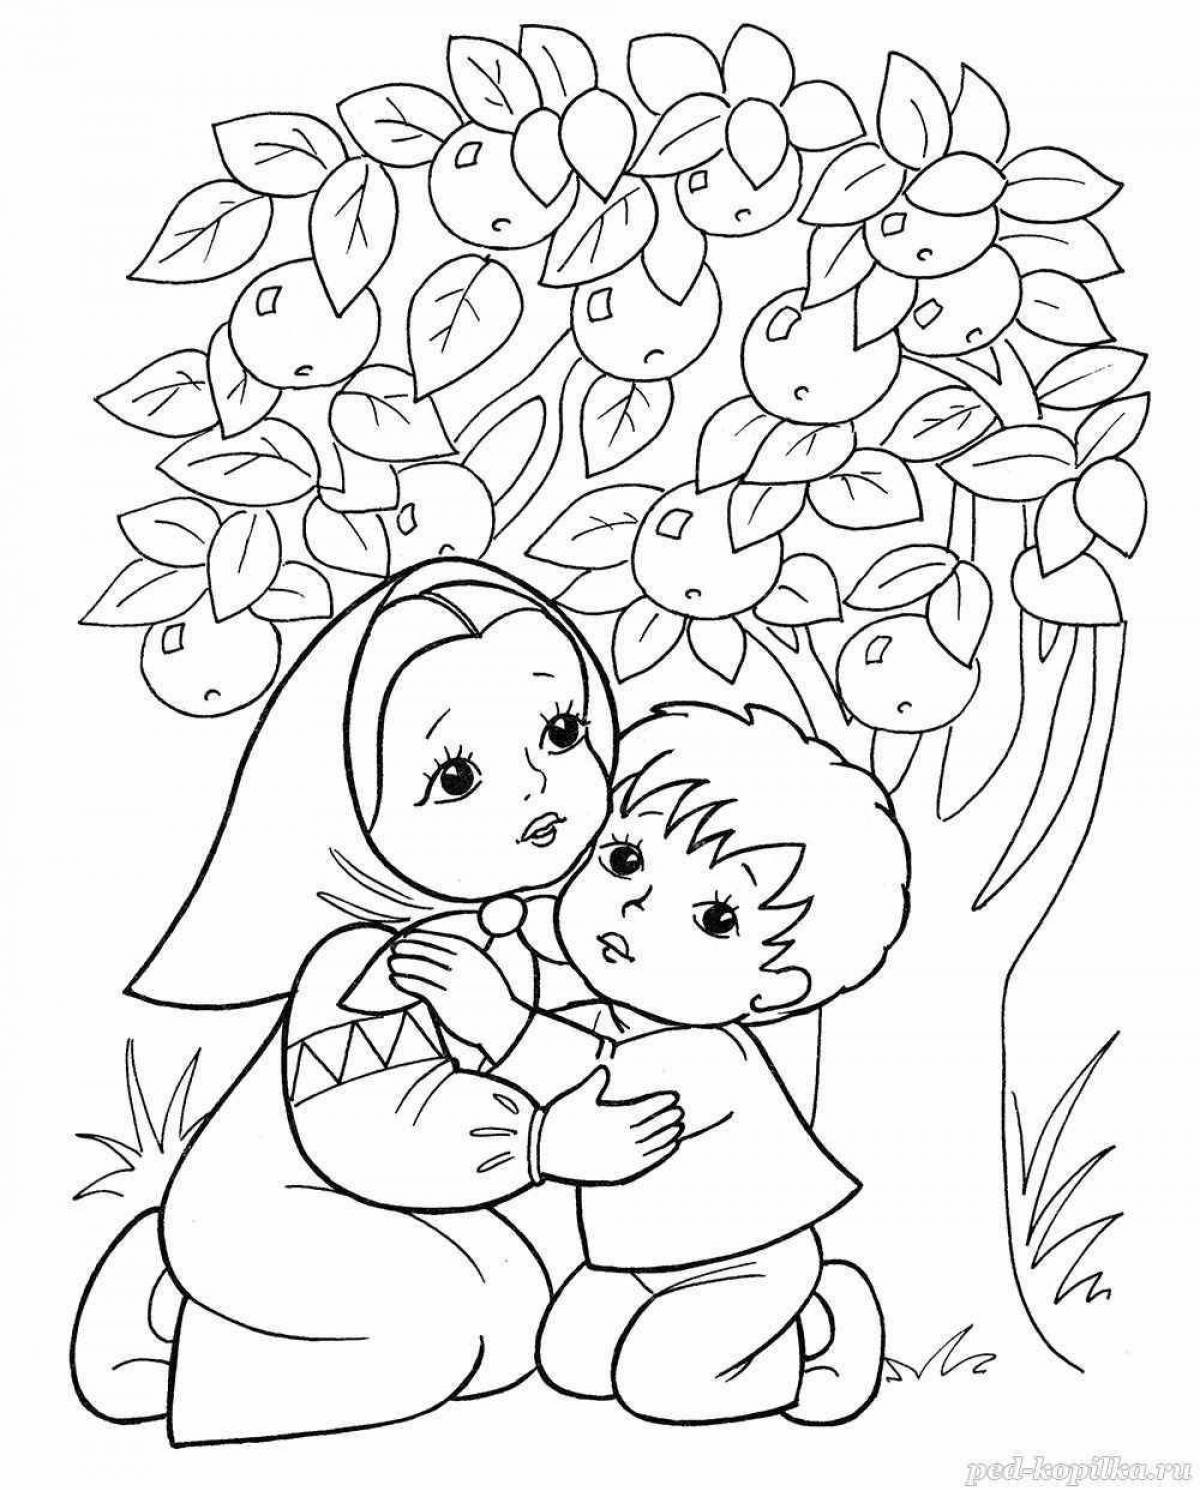 Glorious swan geese coloring pages for children